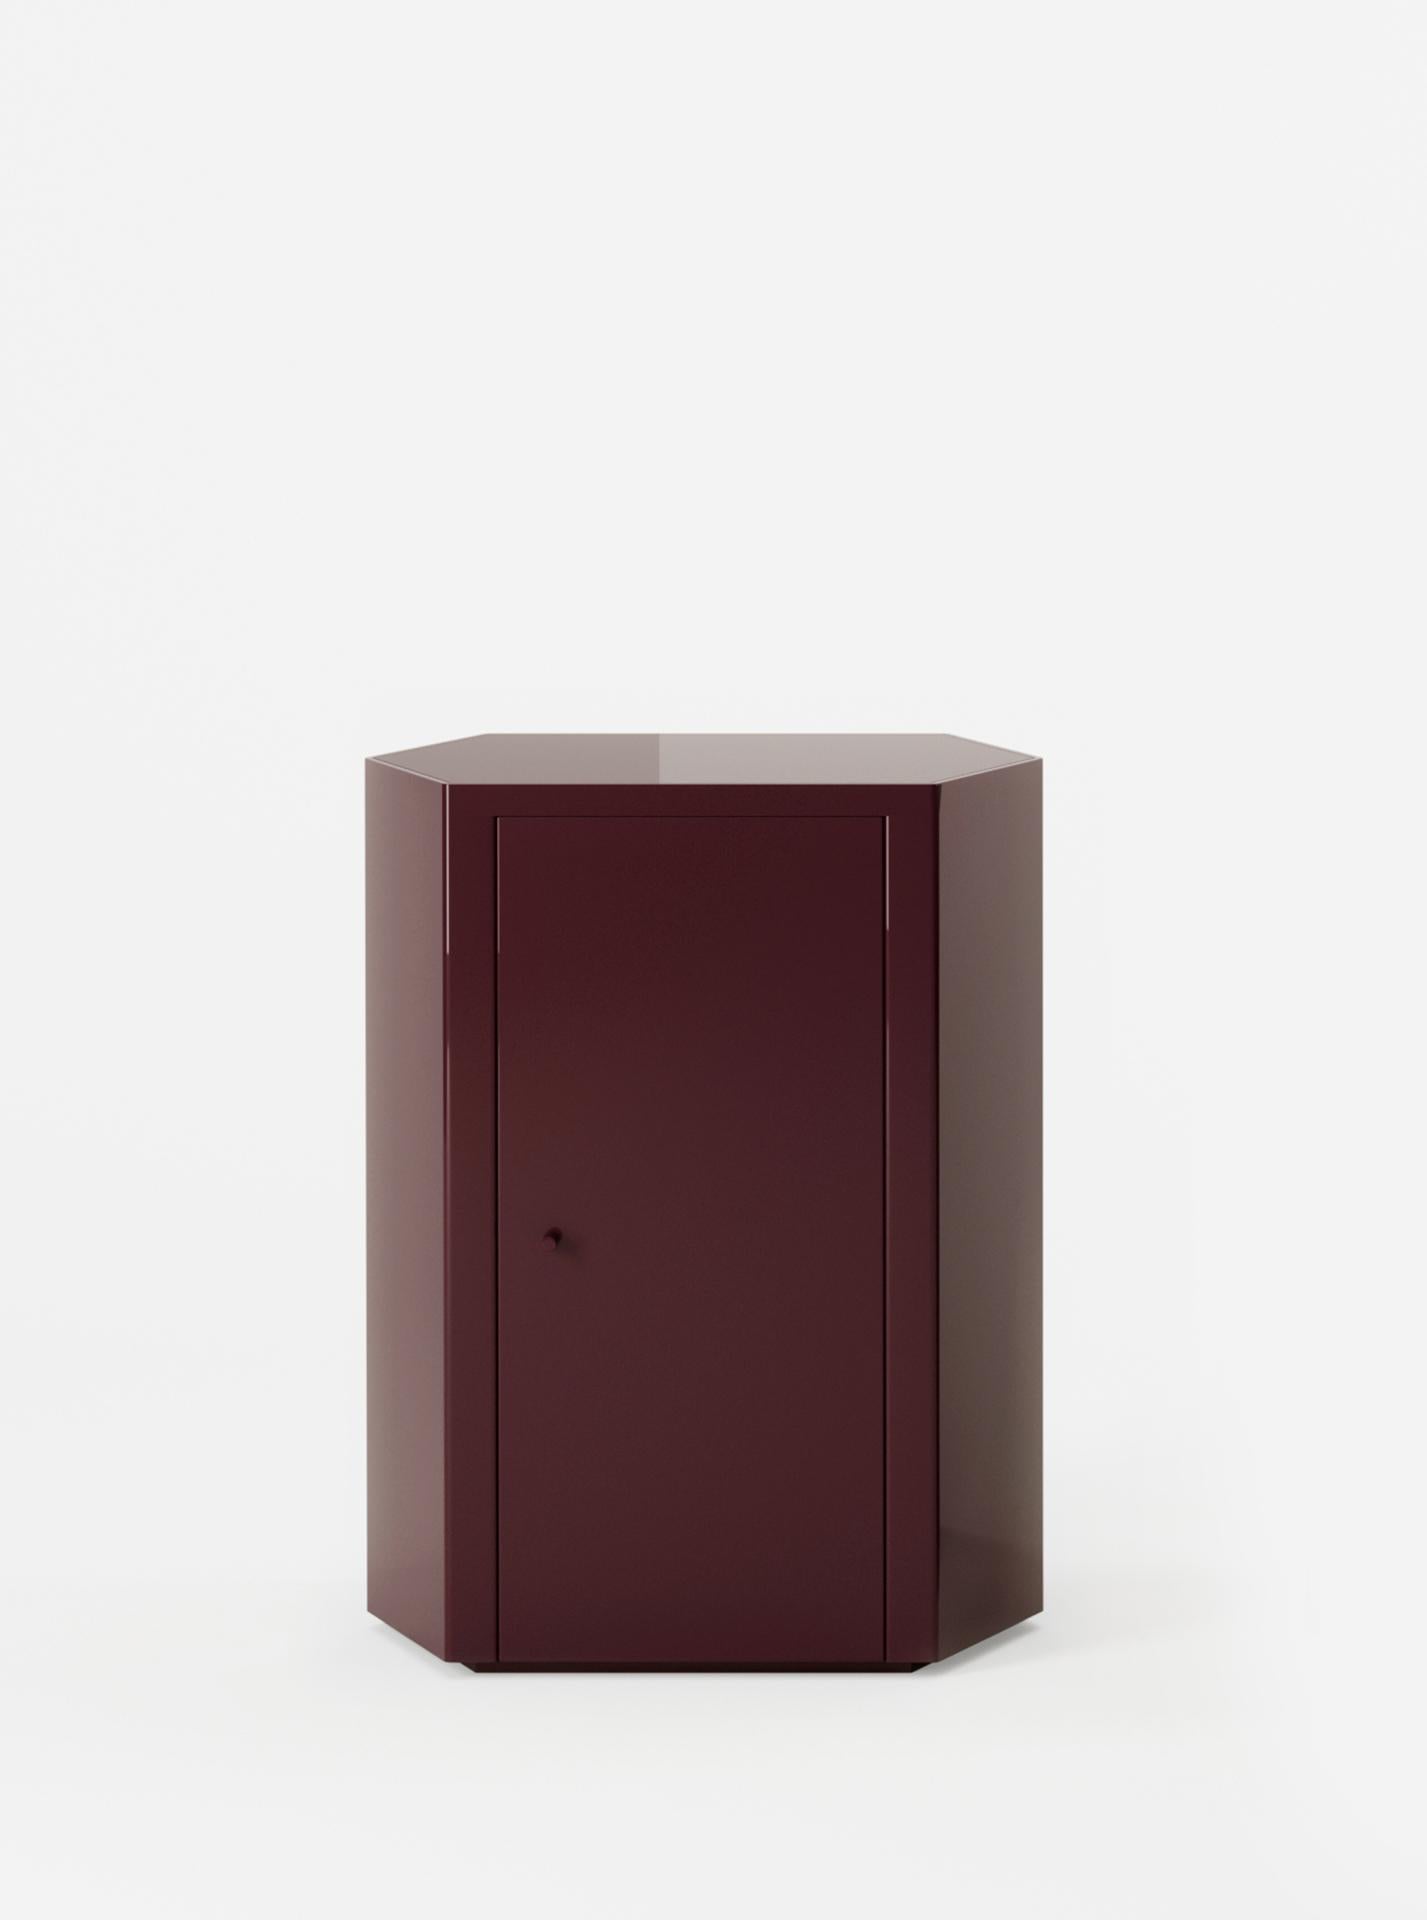 Minimalist Pair of Park Night Stands in Noir Oxblood Lacquer by Yaniv Chen for Lemon For Sale